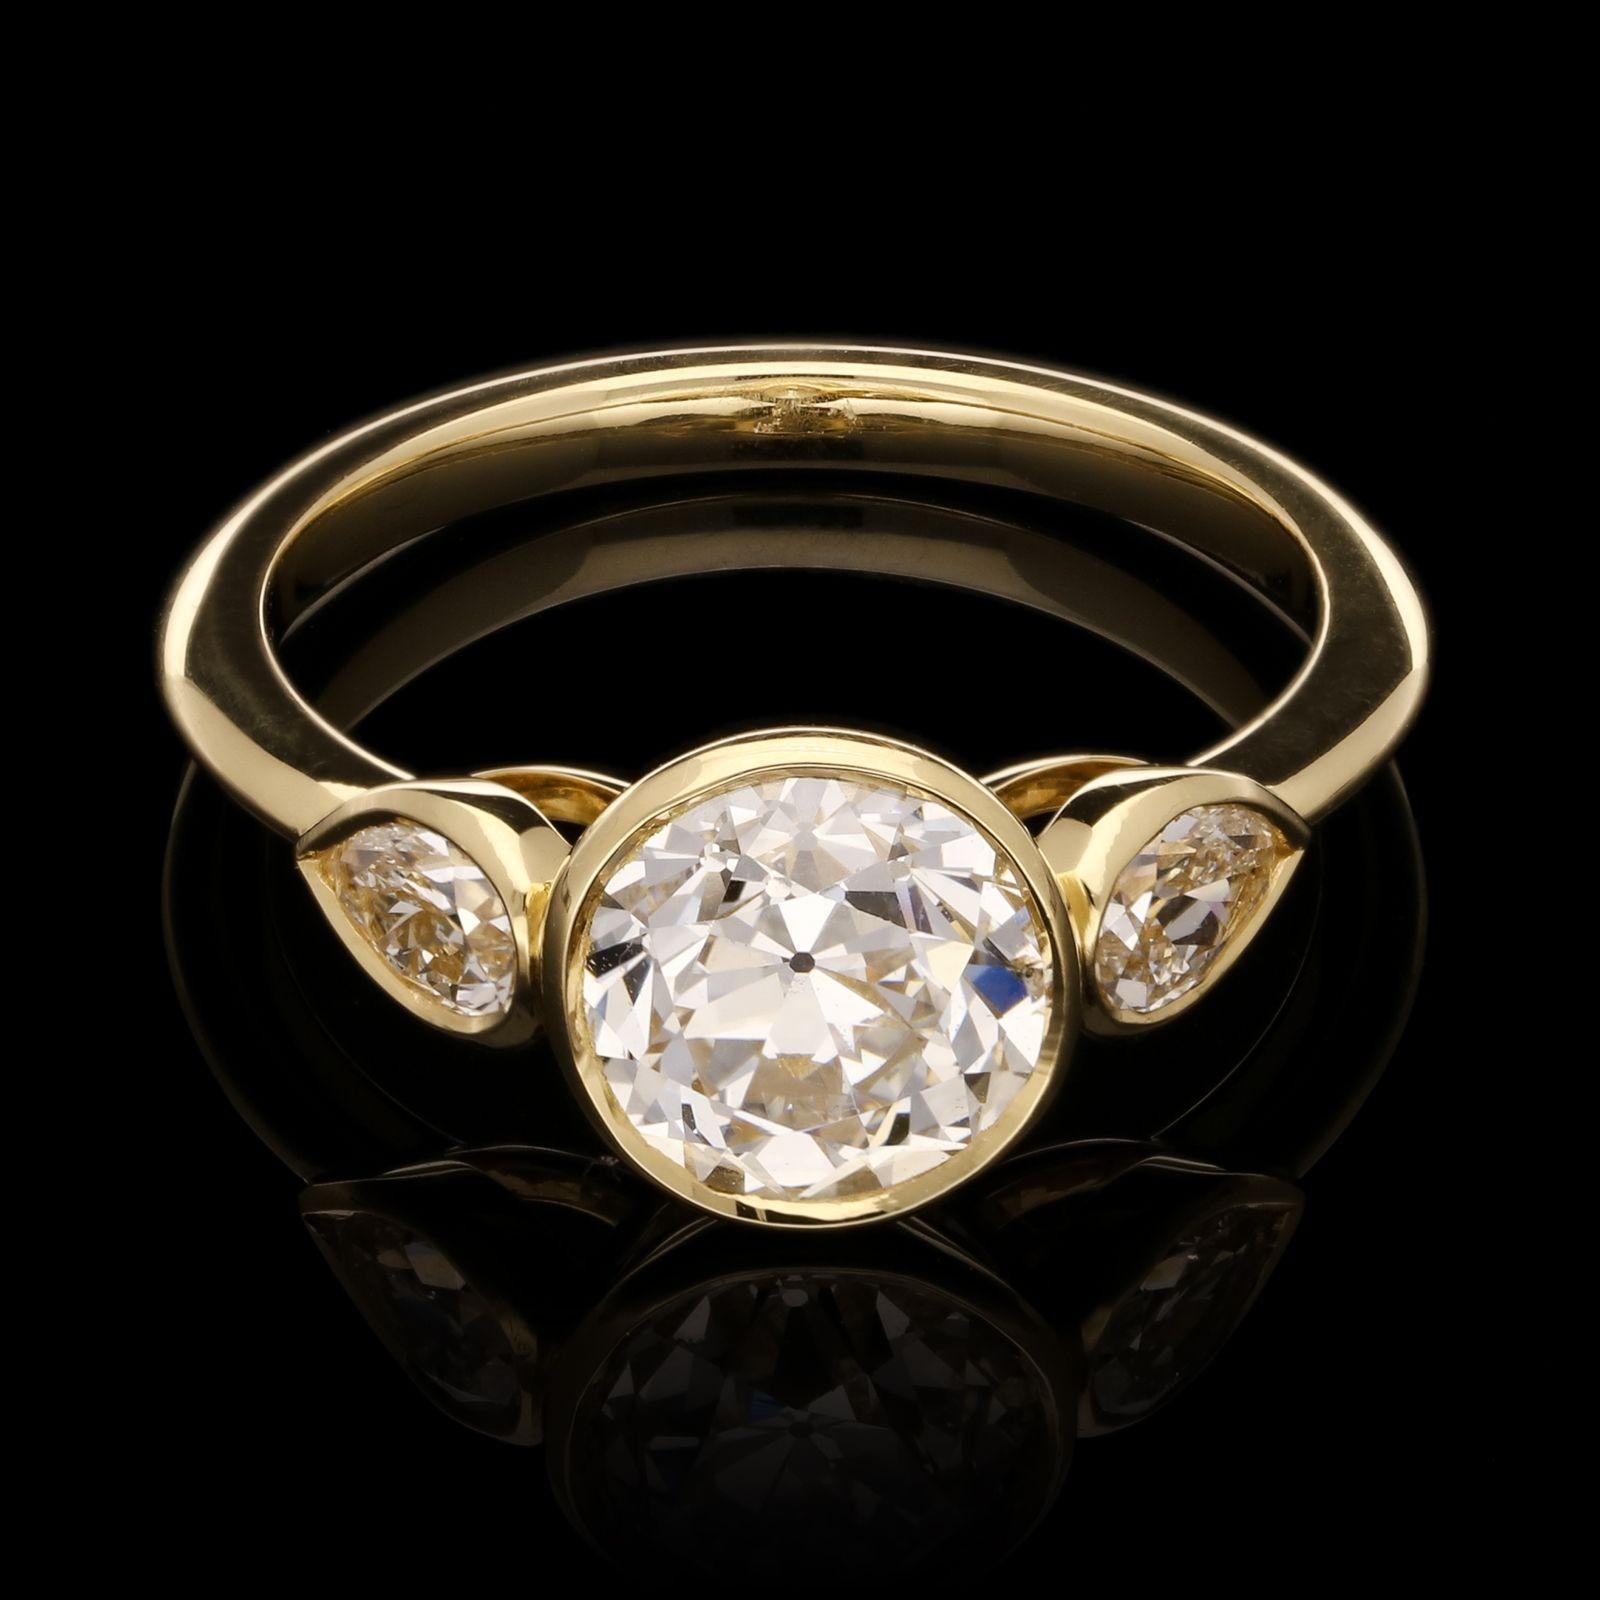 An elegant old cut diamond ring by Hancocks set to the centre with a beautiful old European brilliant cut diamond weighing 1.77ct and of F colour and SI2 clarity between pear shaped diamond shoulders, all in a finely crafted handmade 18ct yellow